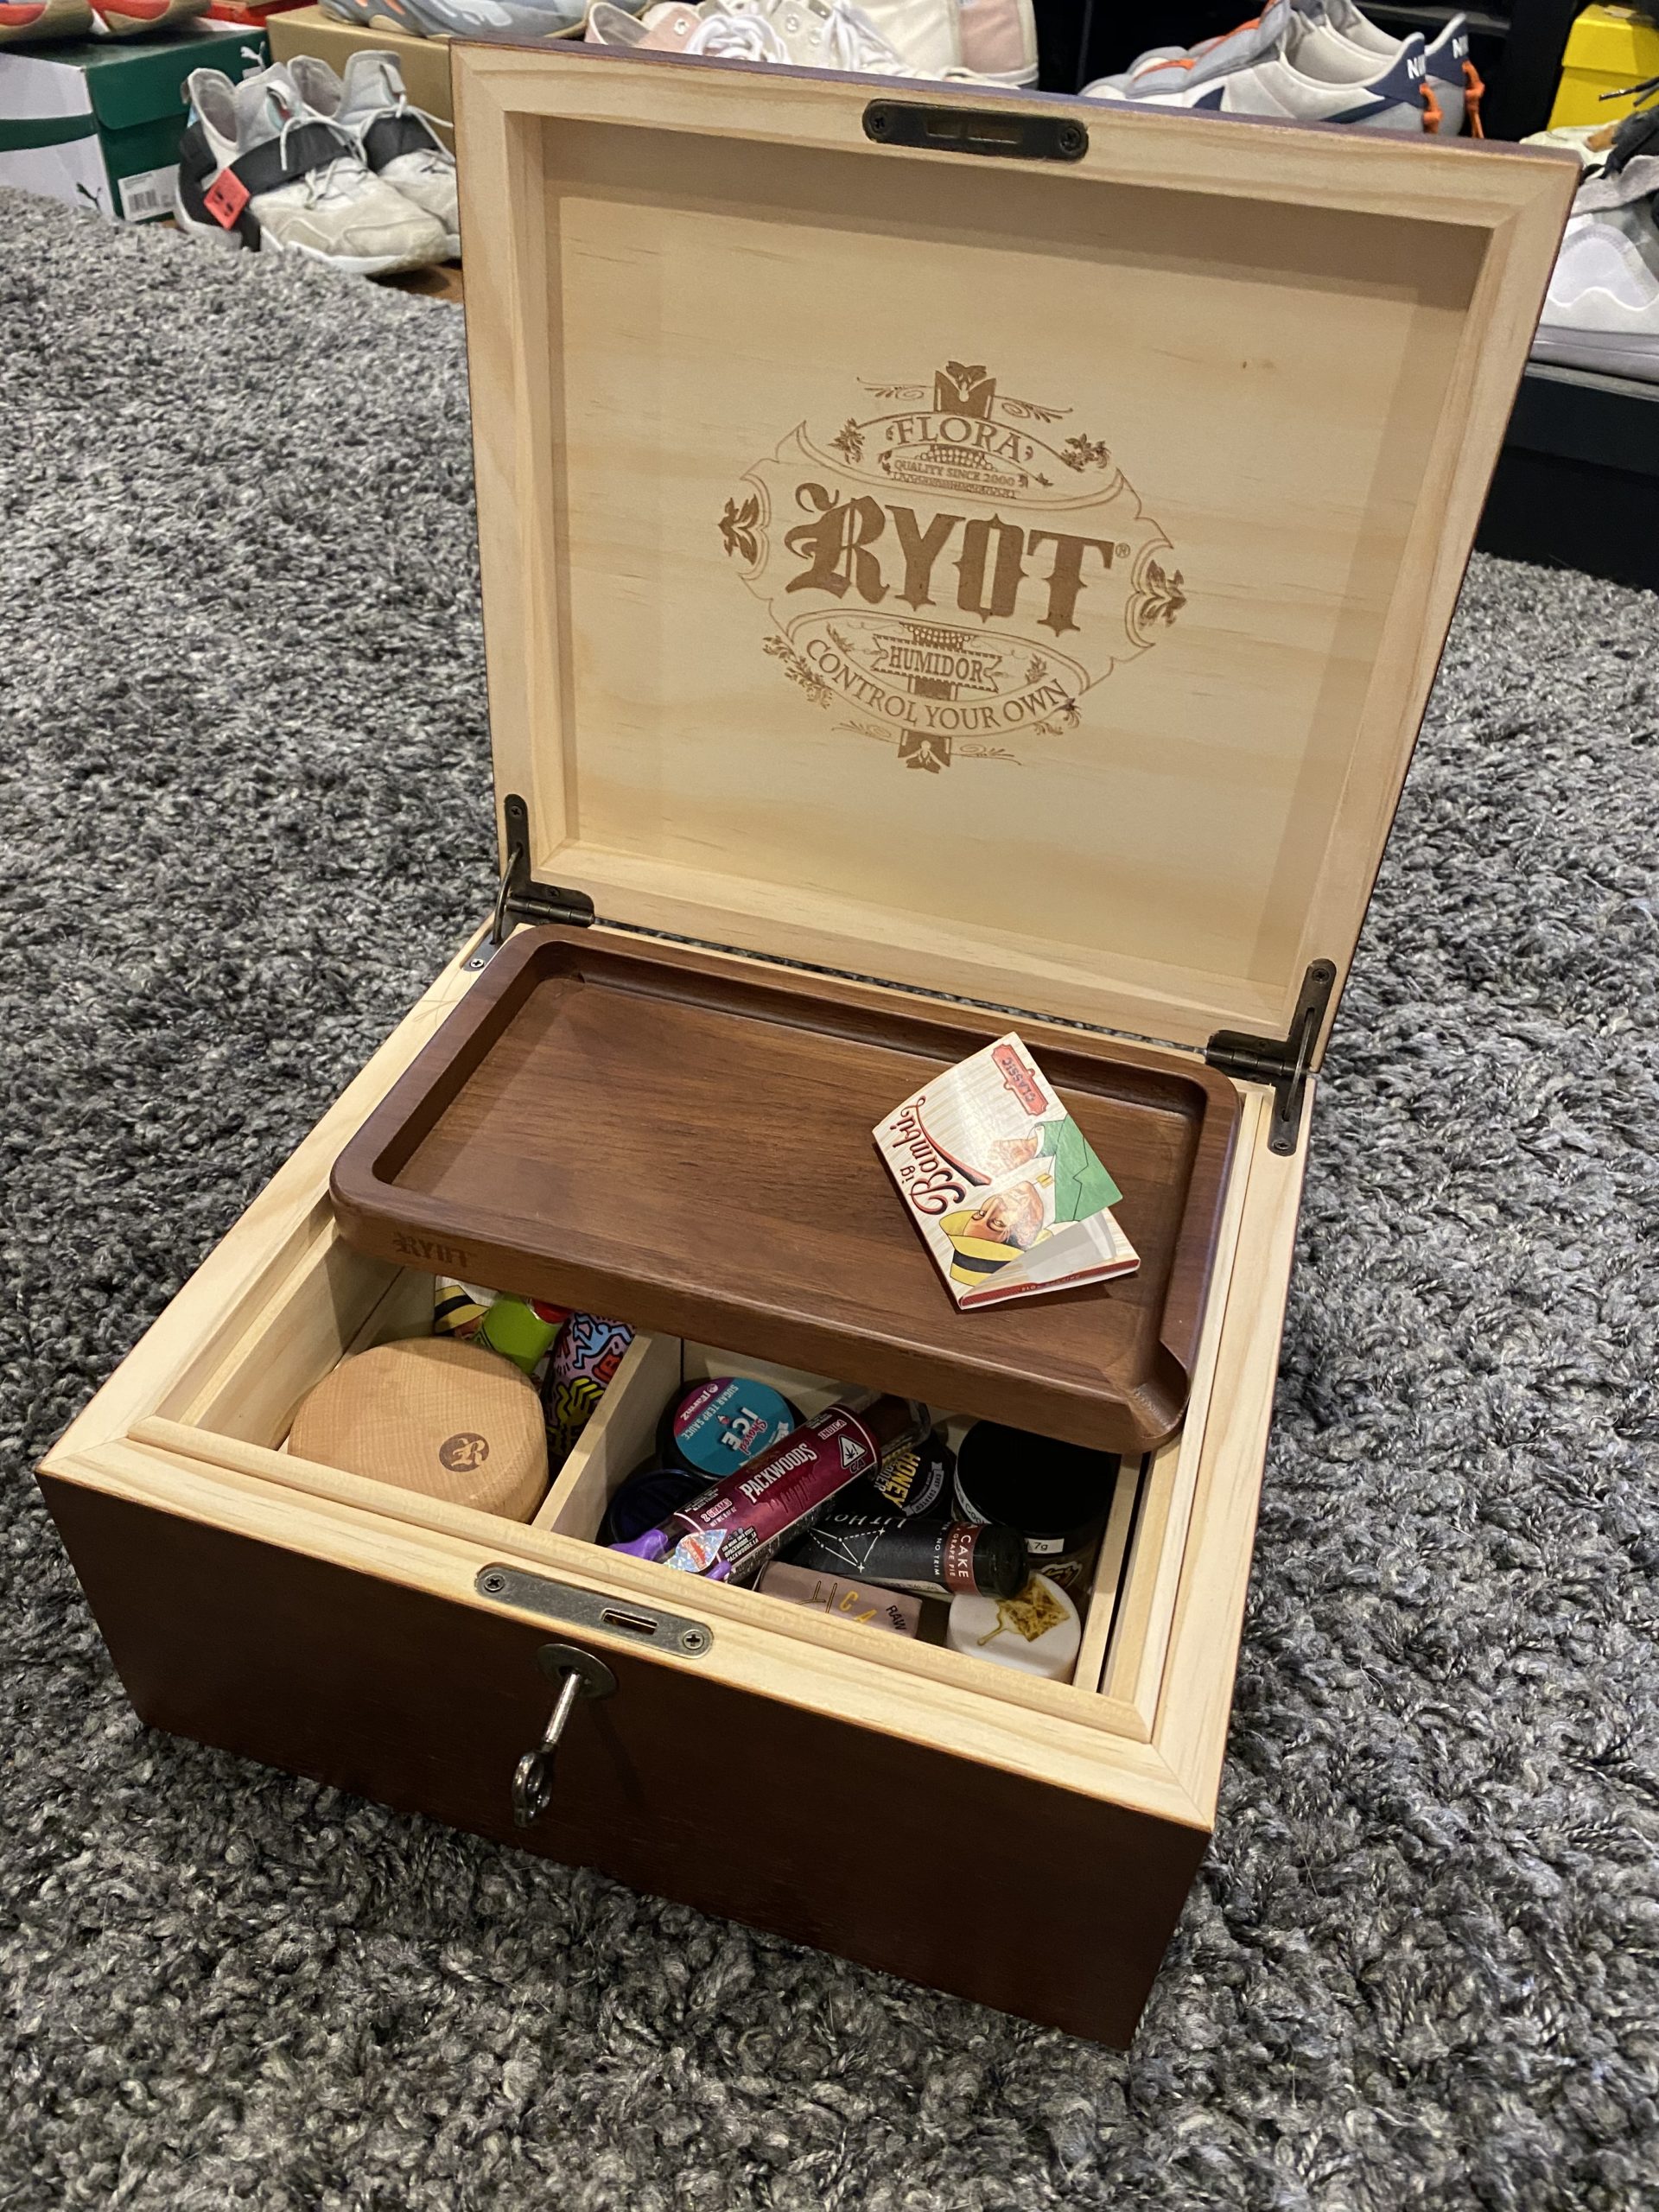 https://hightimes.com/wp-content/uploads/2020/10/product-review-ryots-lock-r-stash-box-featured-scaled.jpeg